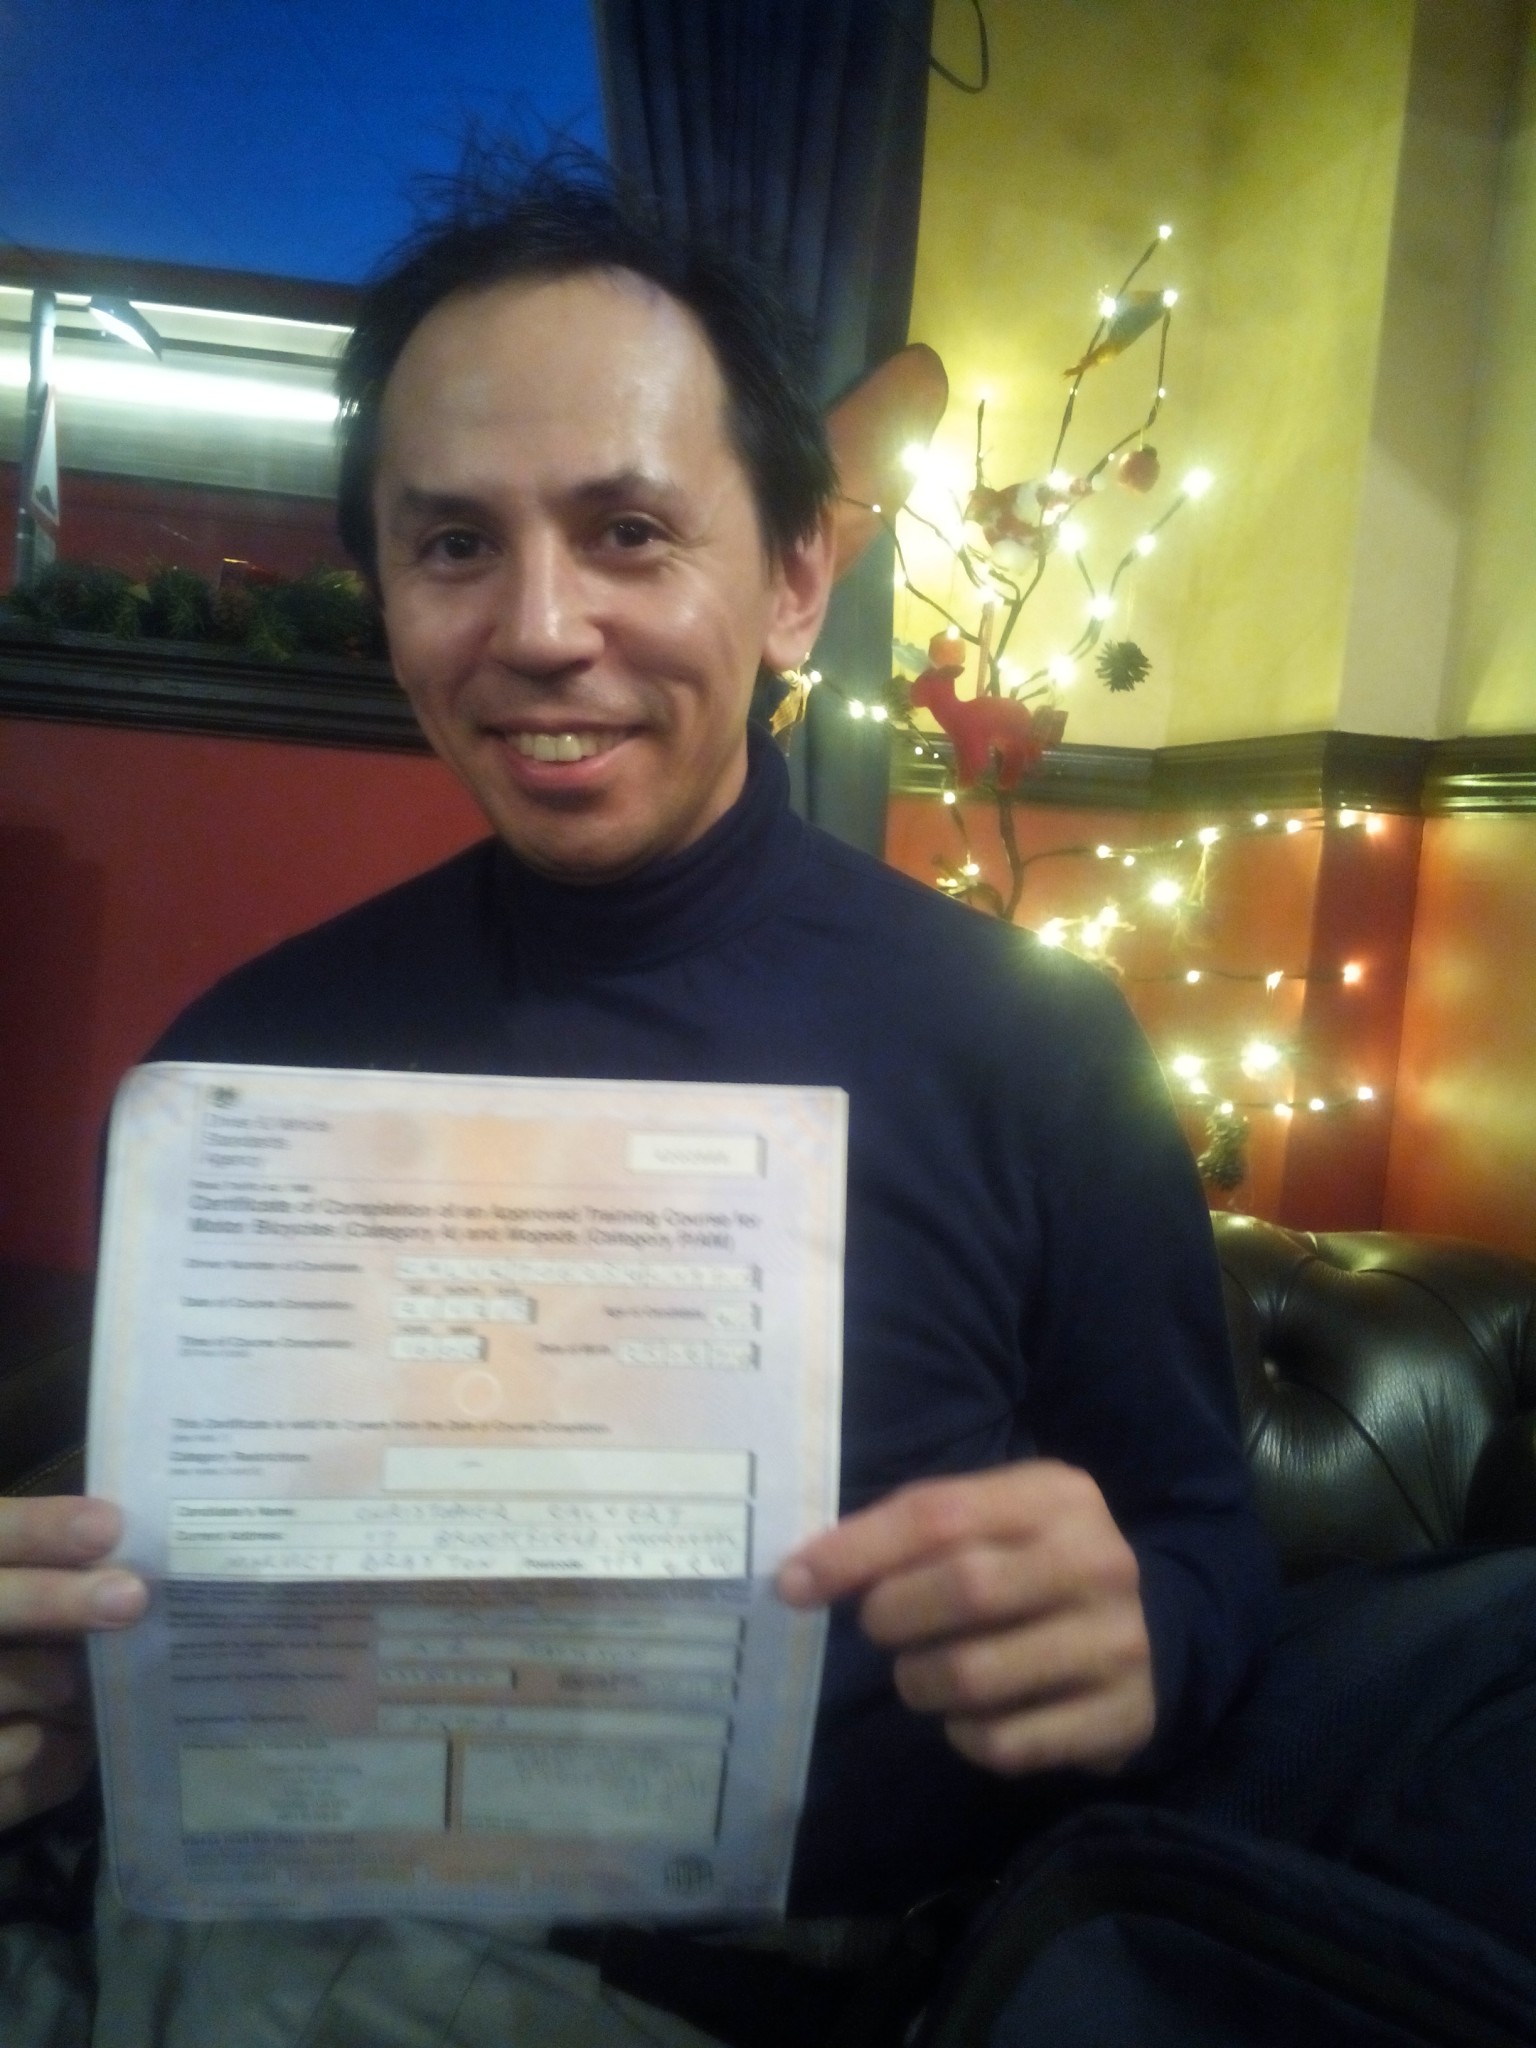 A Very Merry Christopher celebrating completing the CBT